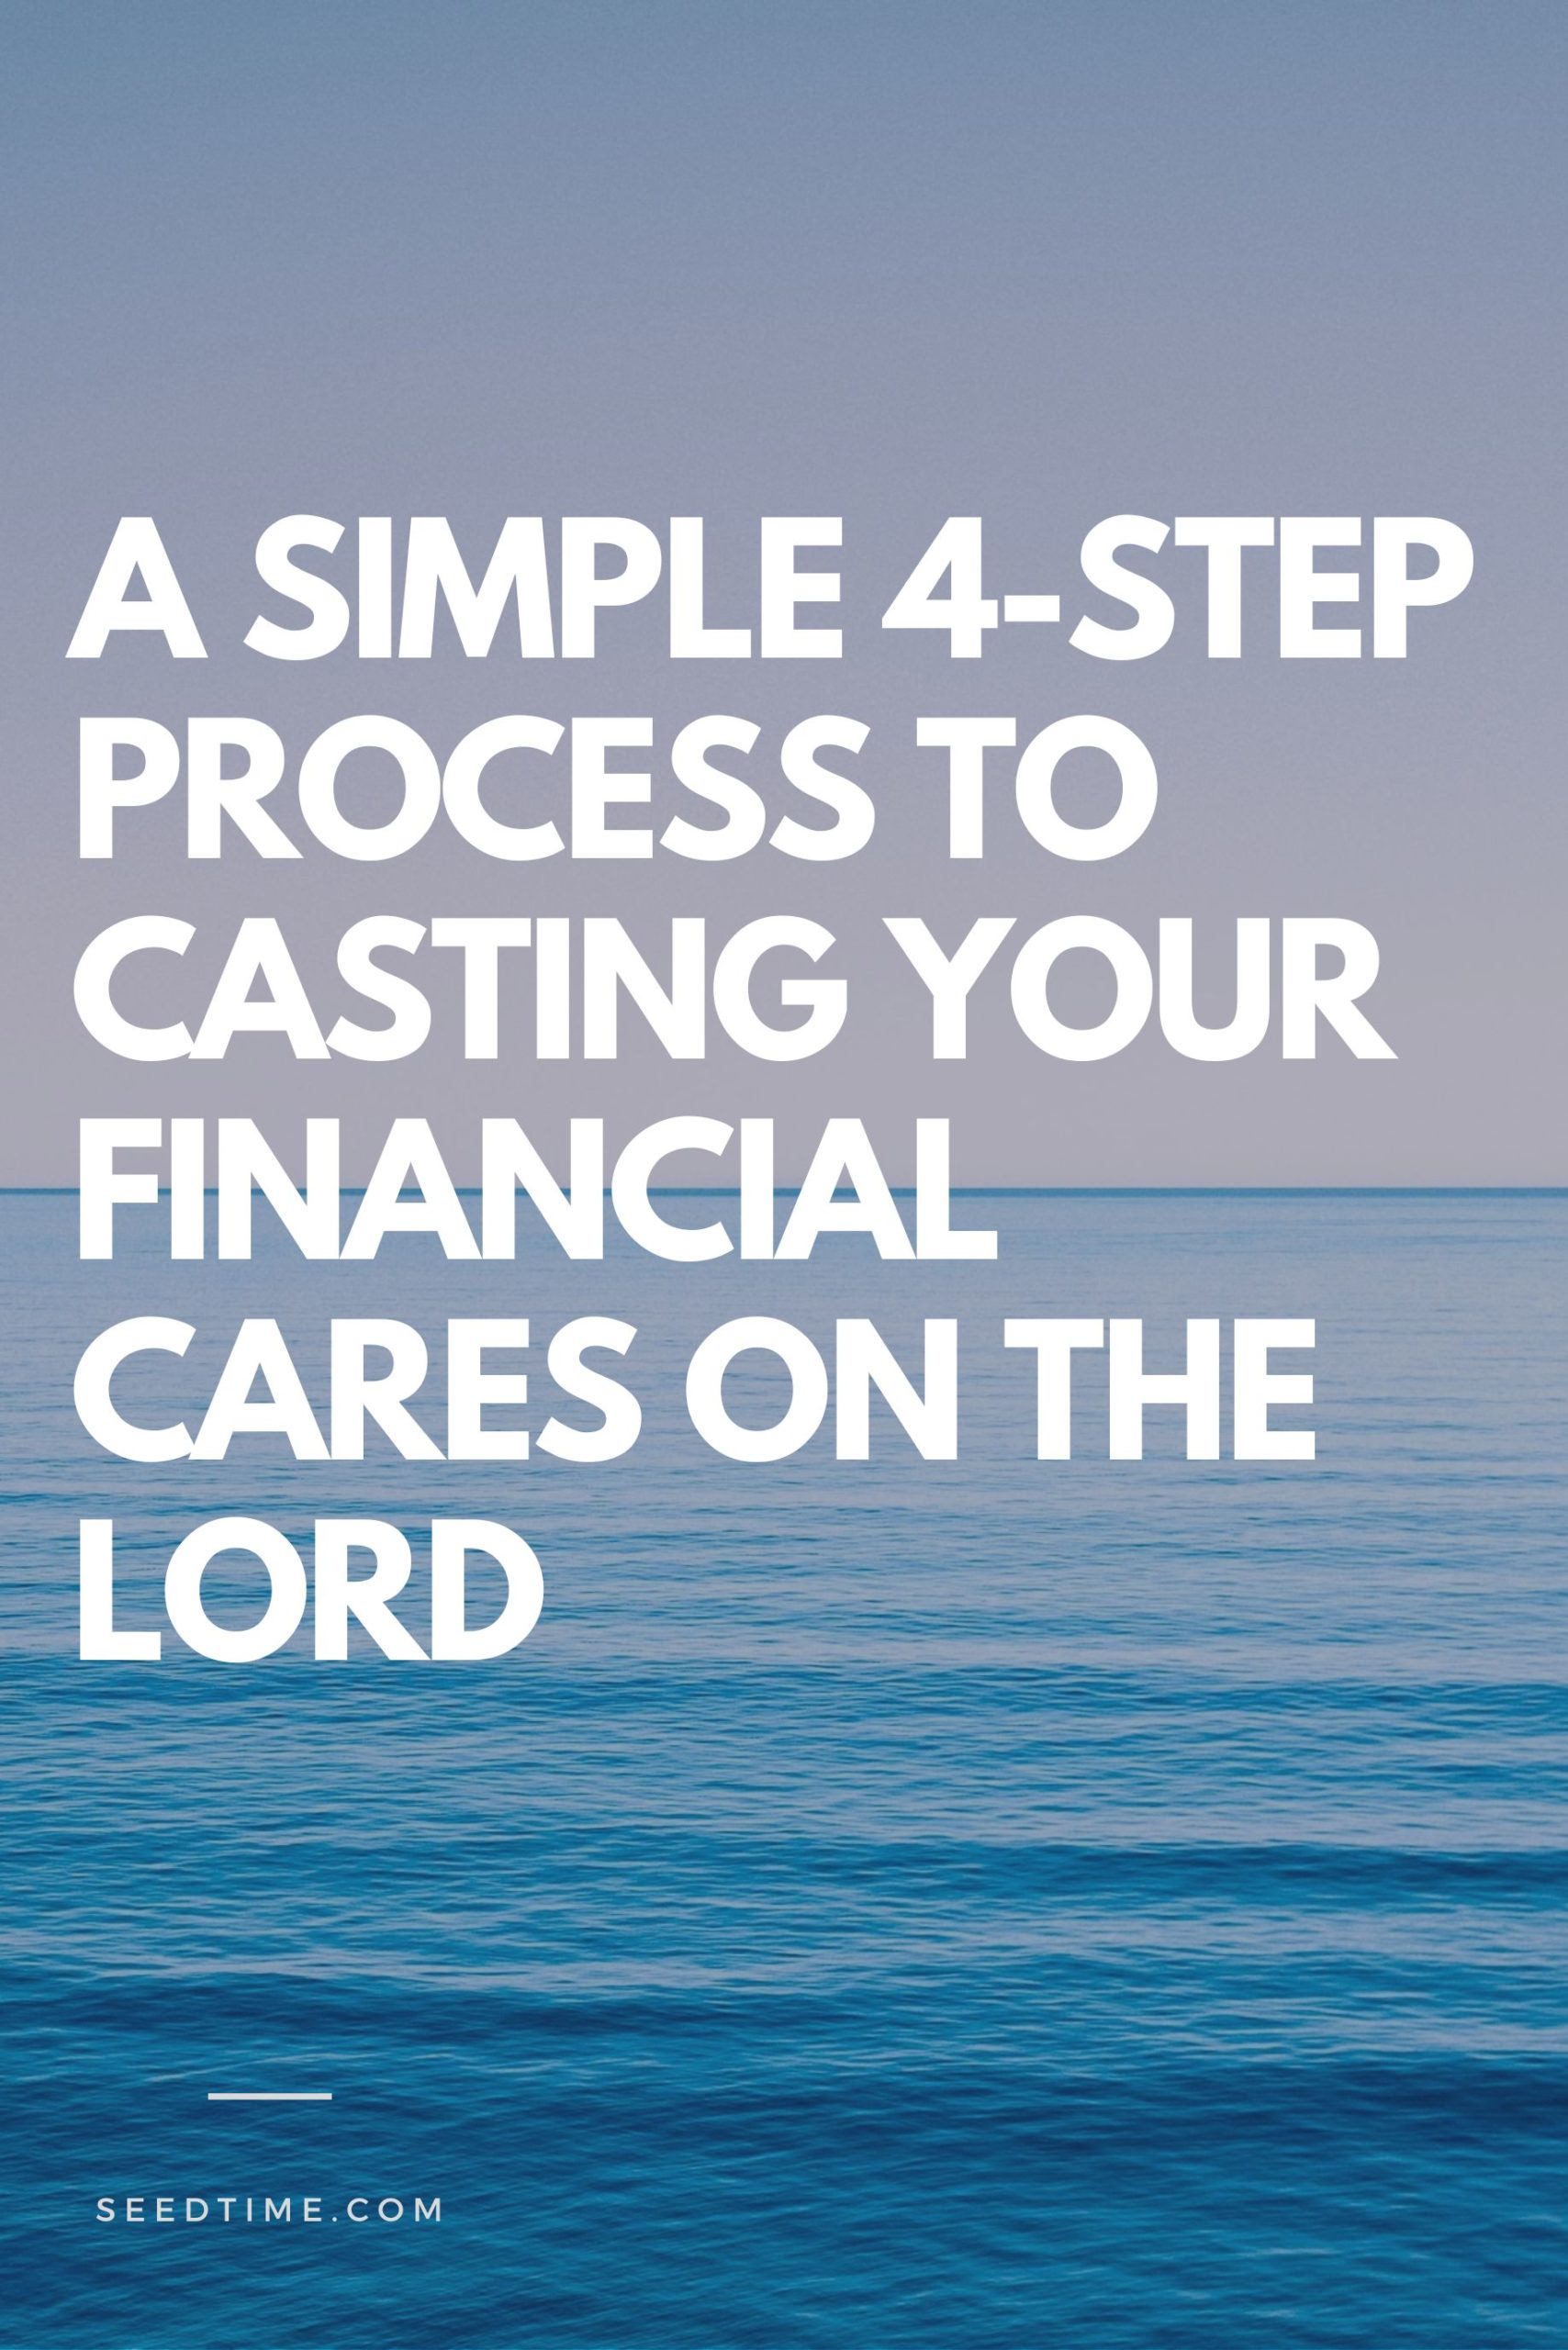 A simple 4 step process to casting your financial cares on the Lord scaled